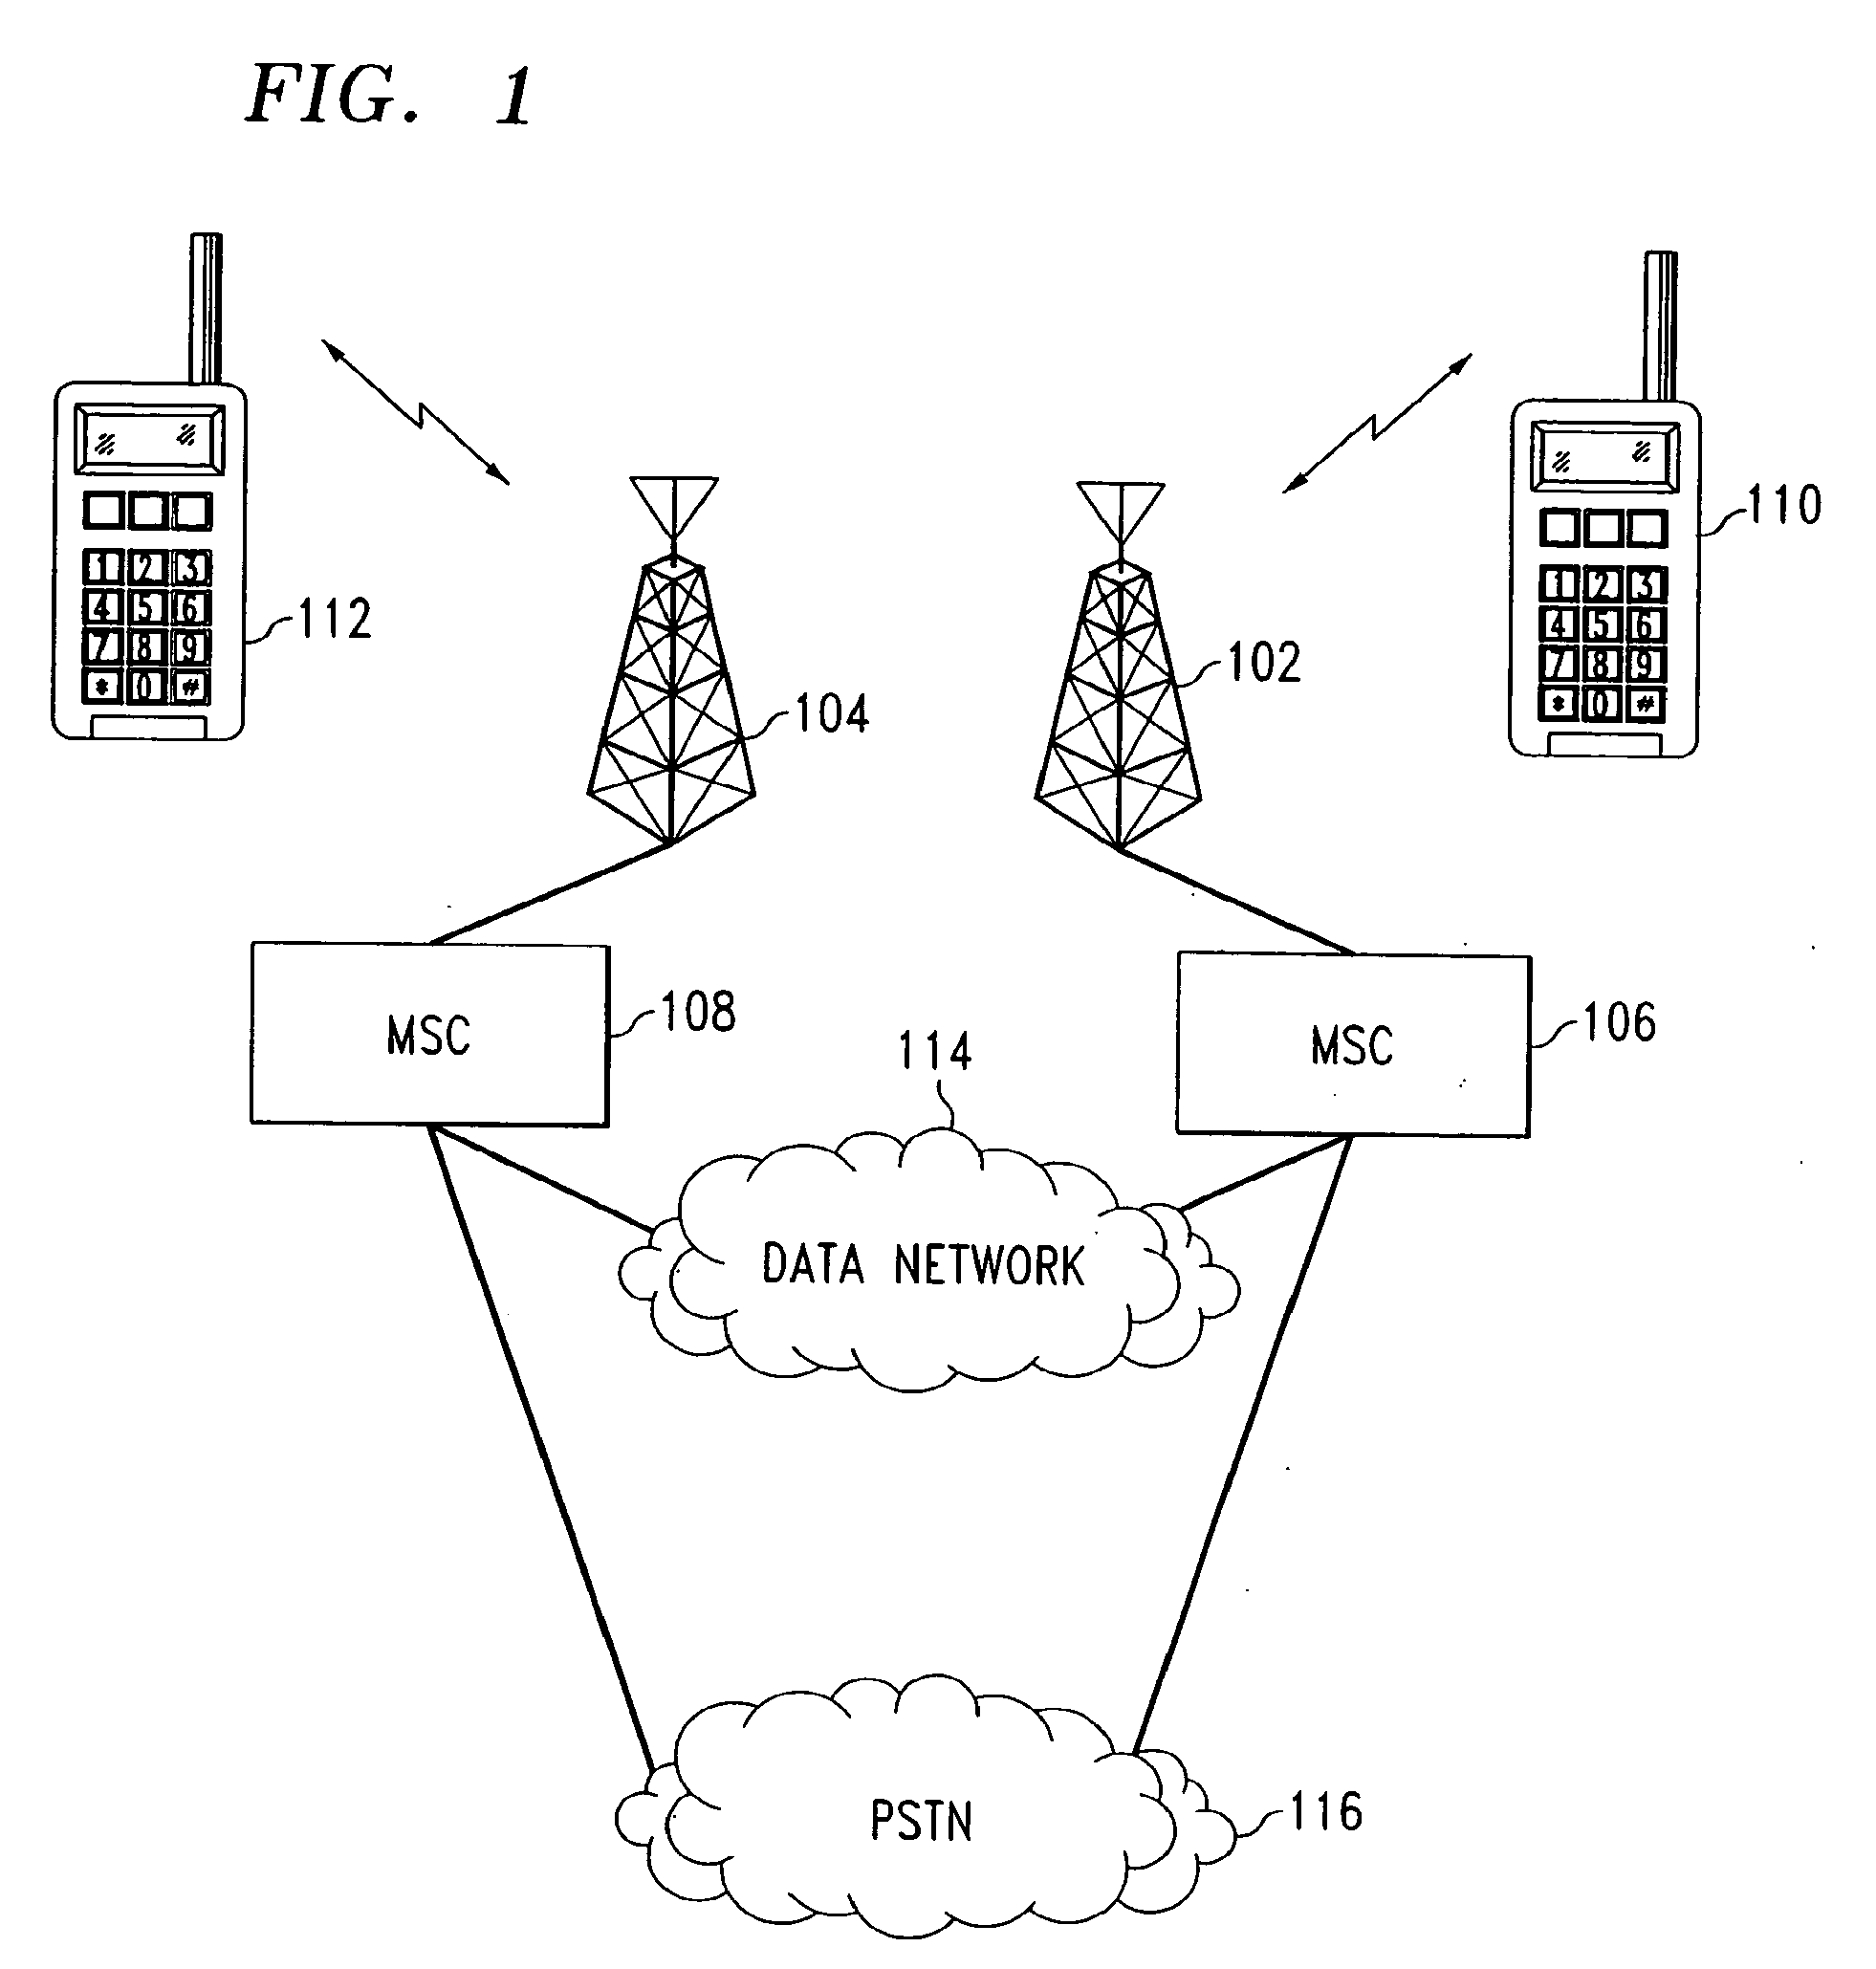 Method for diverting an isup talkpath to an IP talkpath